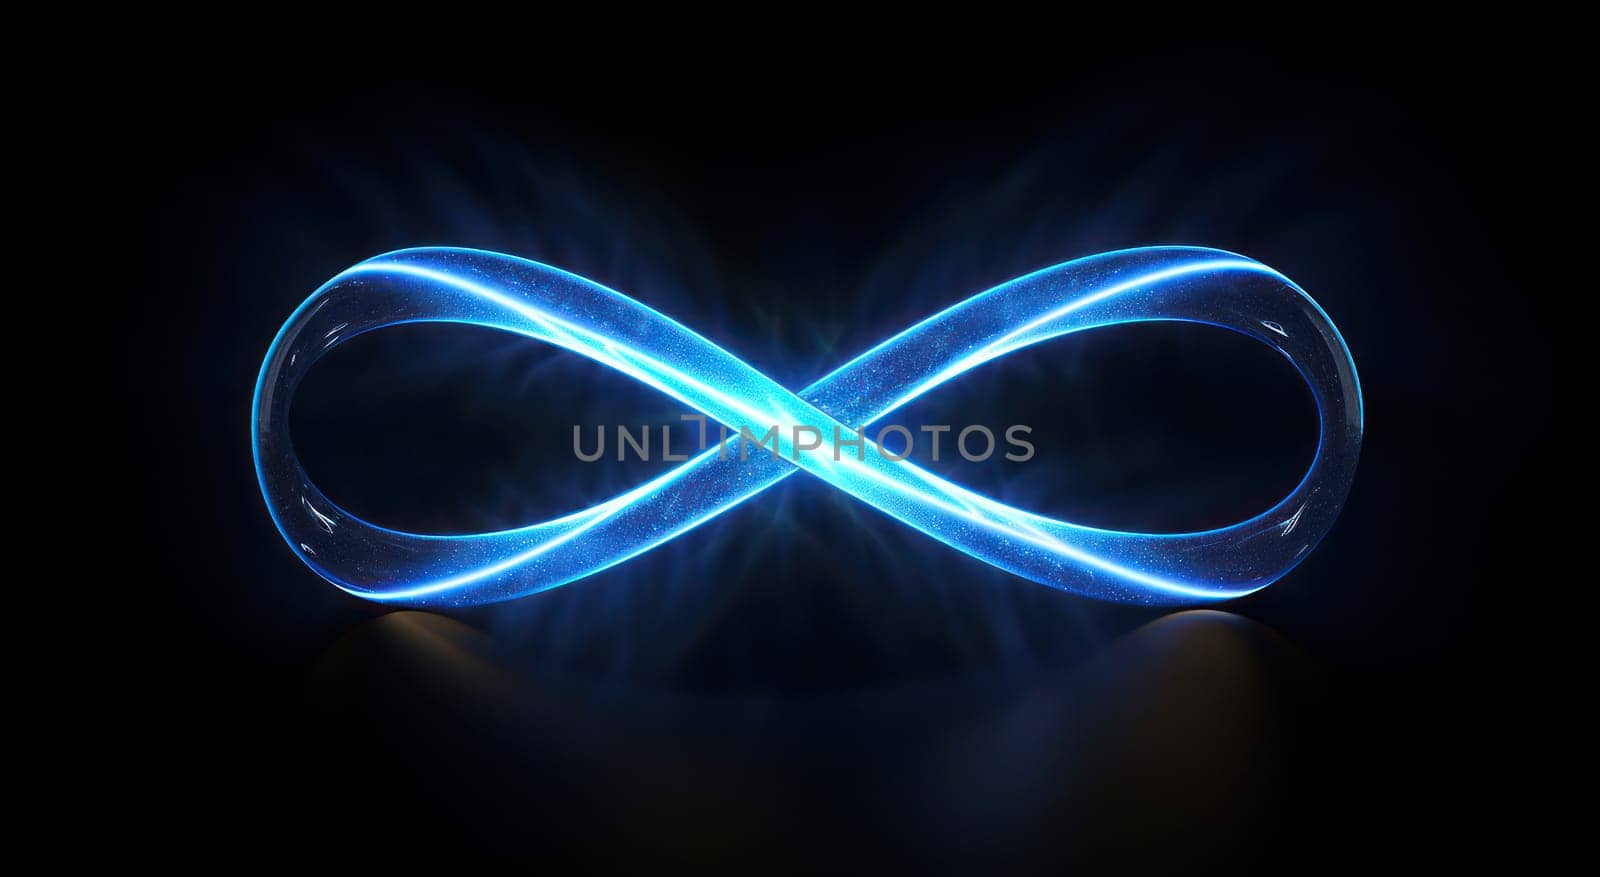 Eternal Glowing: Abstract Motion of Infinite Light and Power in a Blue Neon Curve by Vichizh